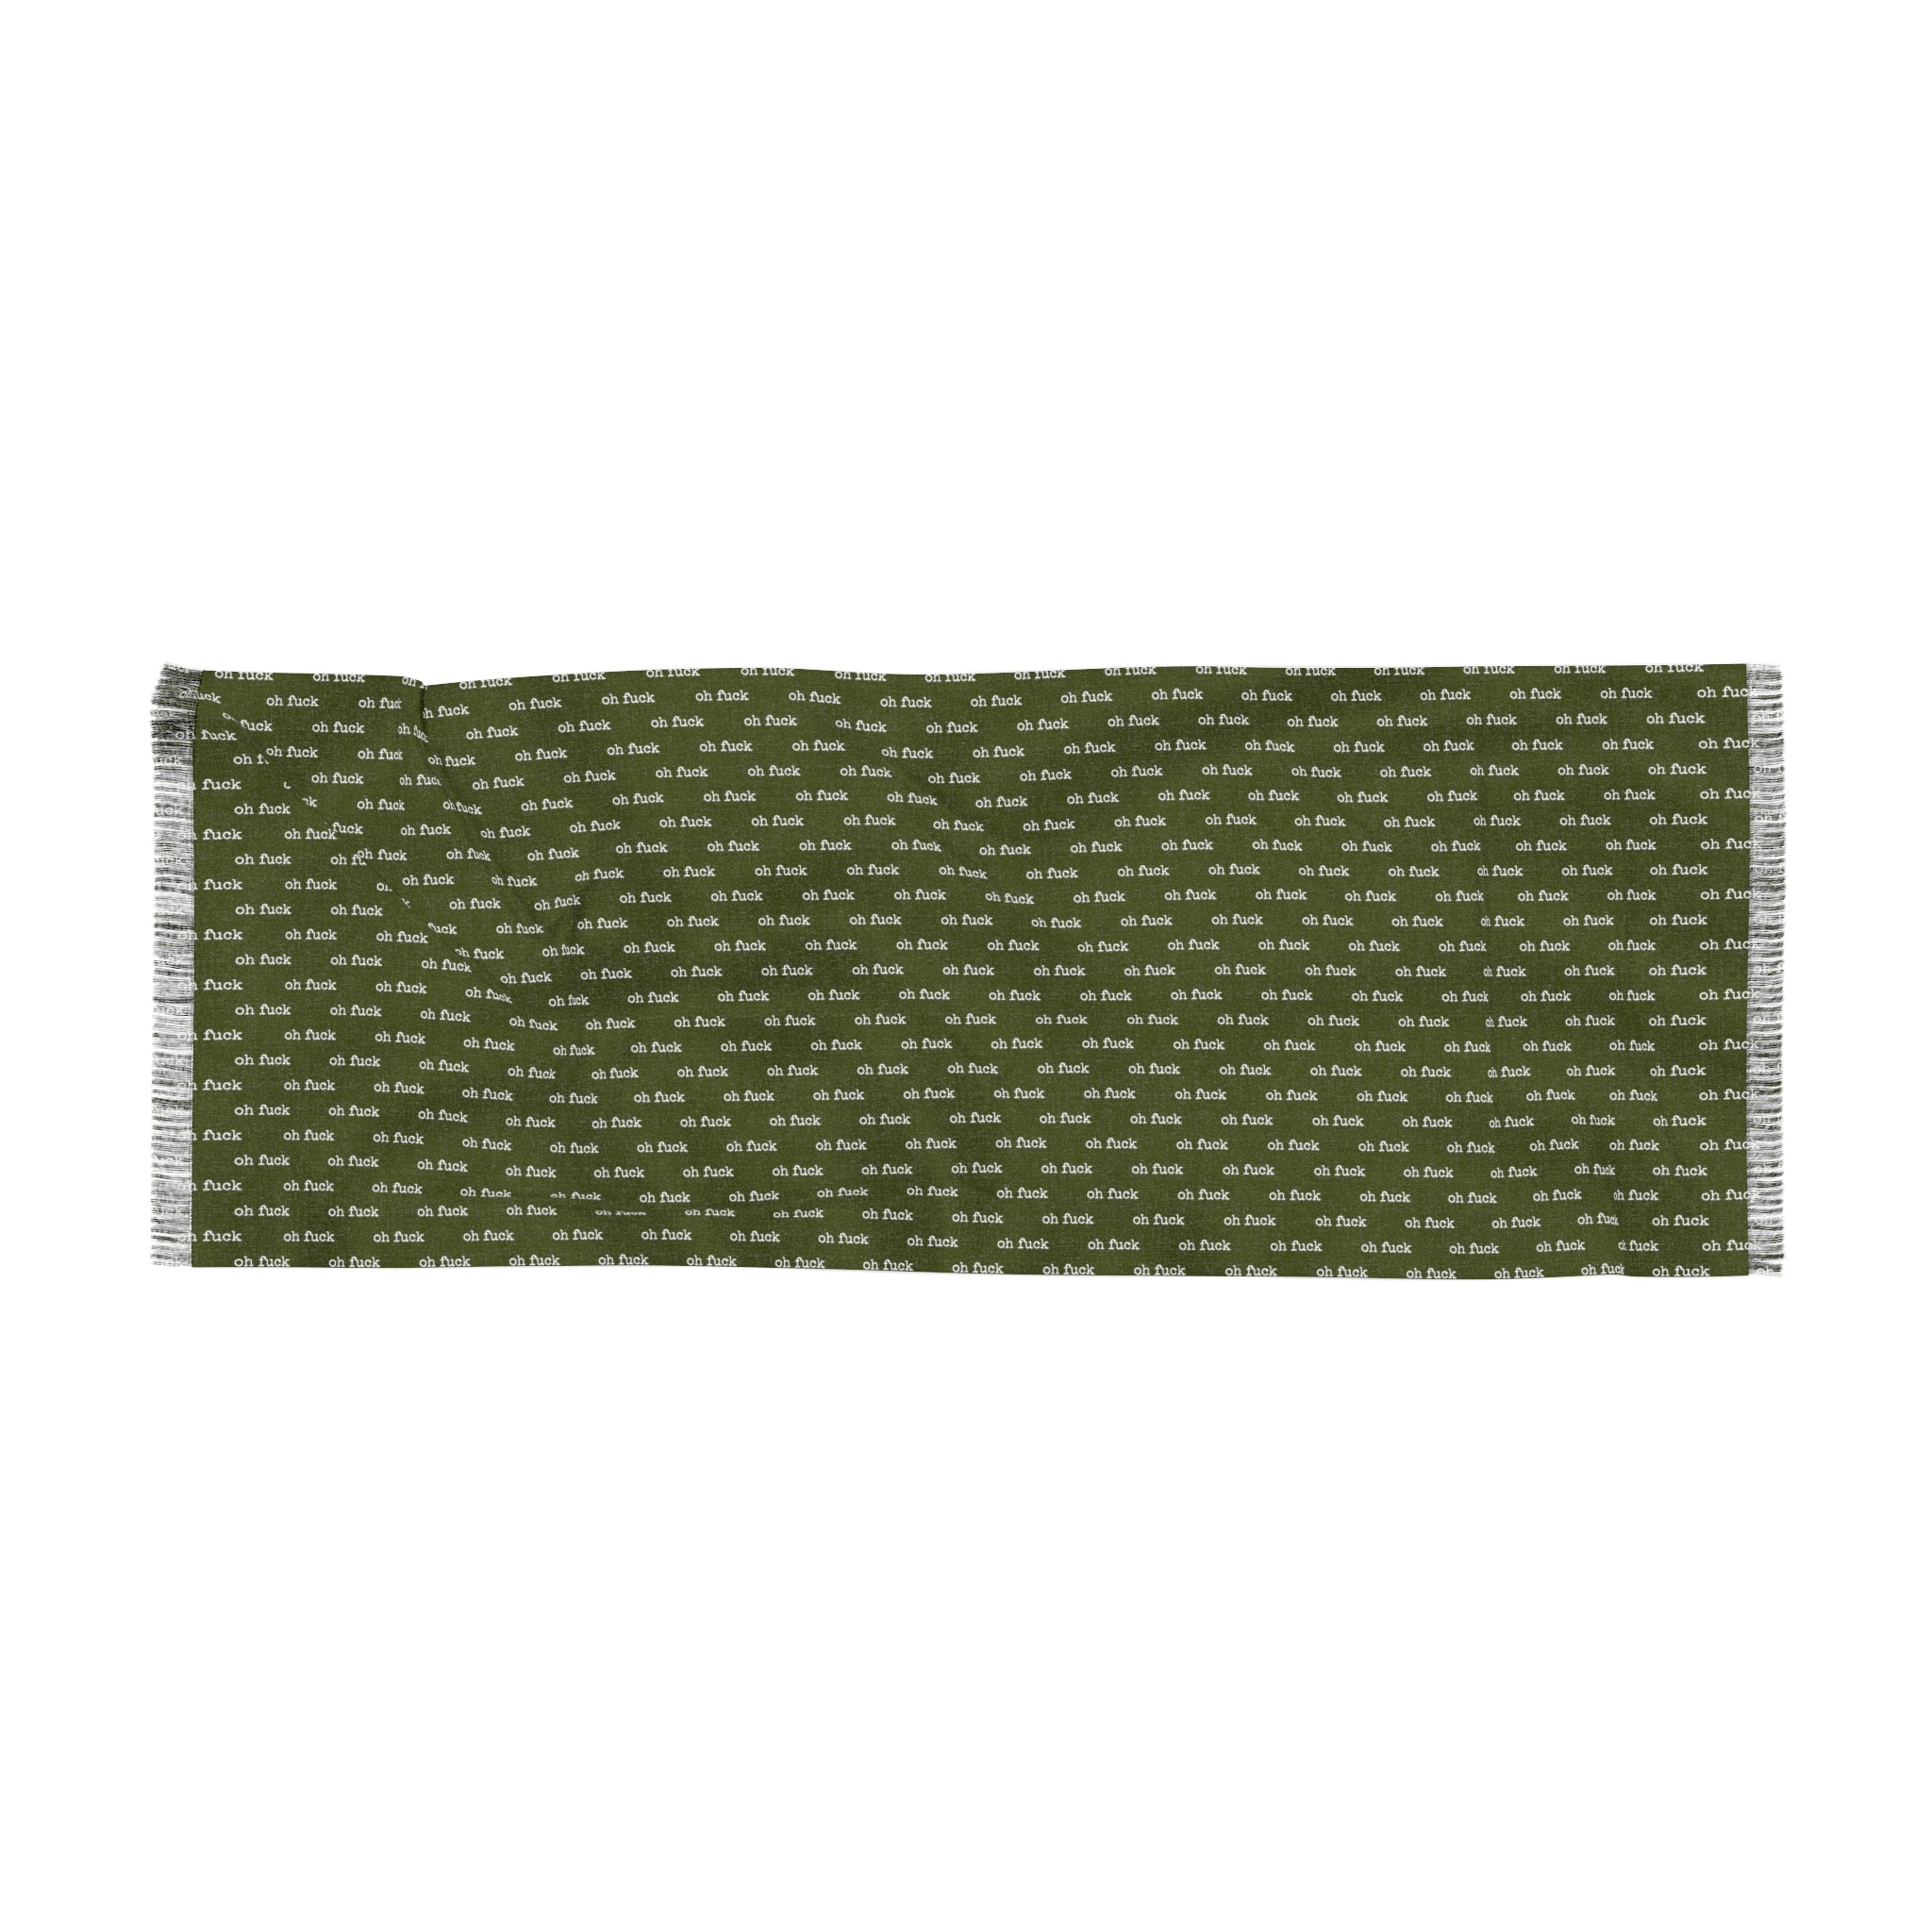 "Oh Fuck" Word Phrase Army Green Lightweight Scarf Scarves 27×73 The Middle Aged Groove